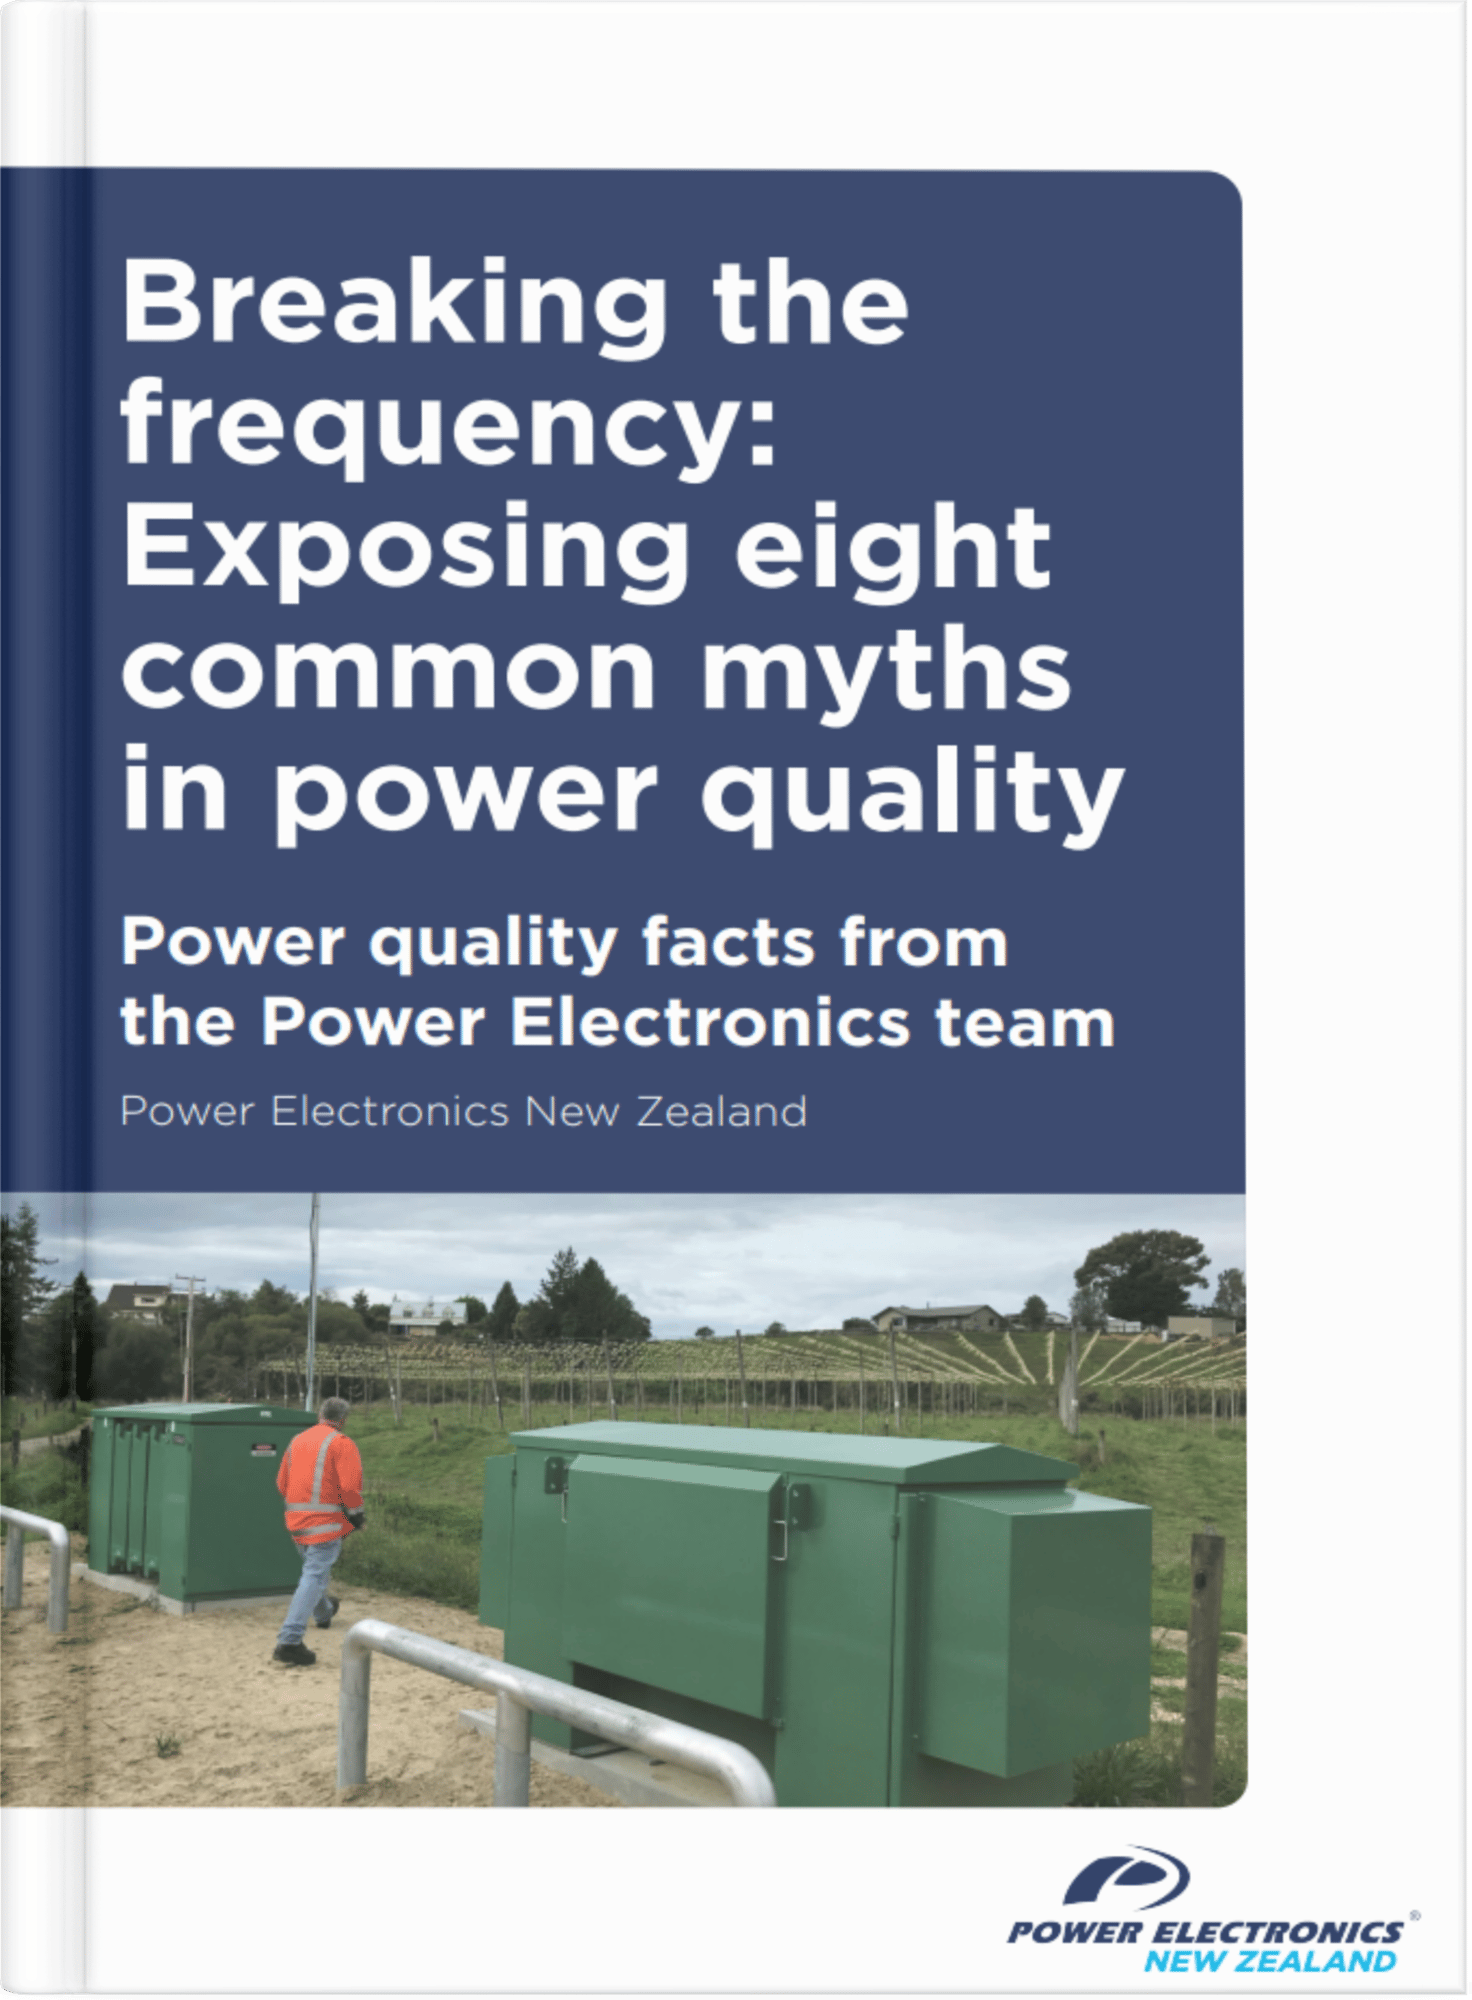 Breaking the frequency: Exposing eight common myths in power quality